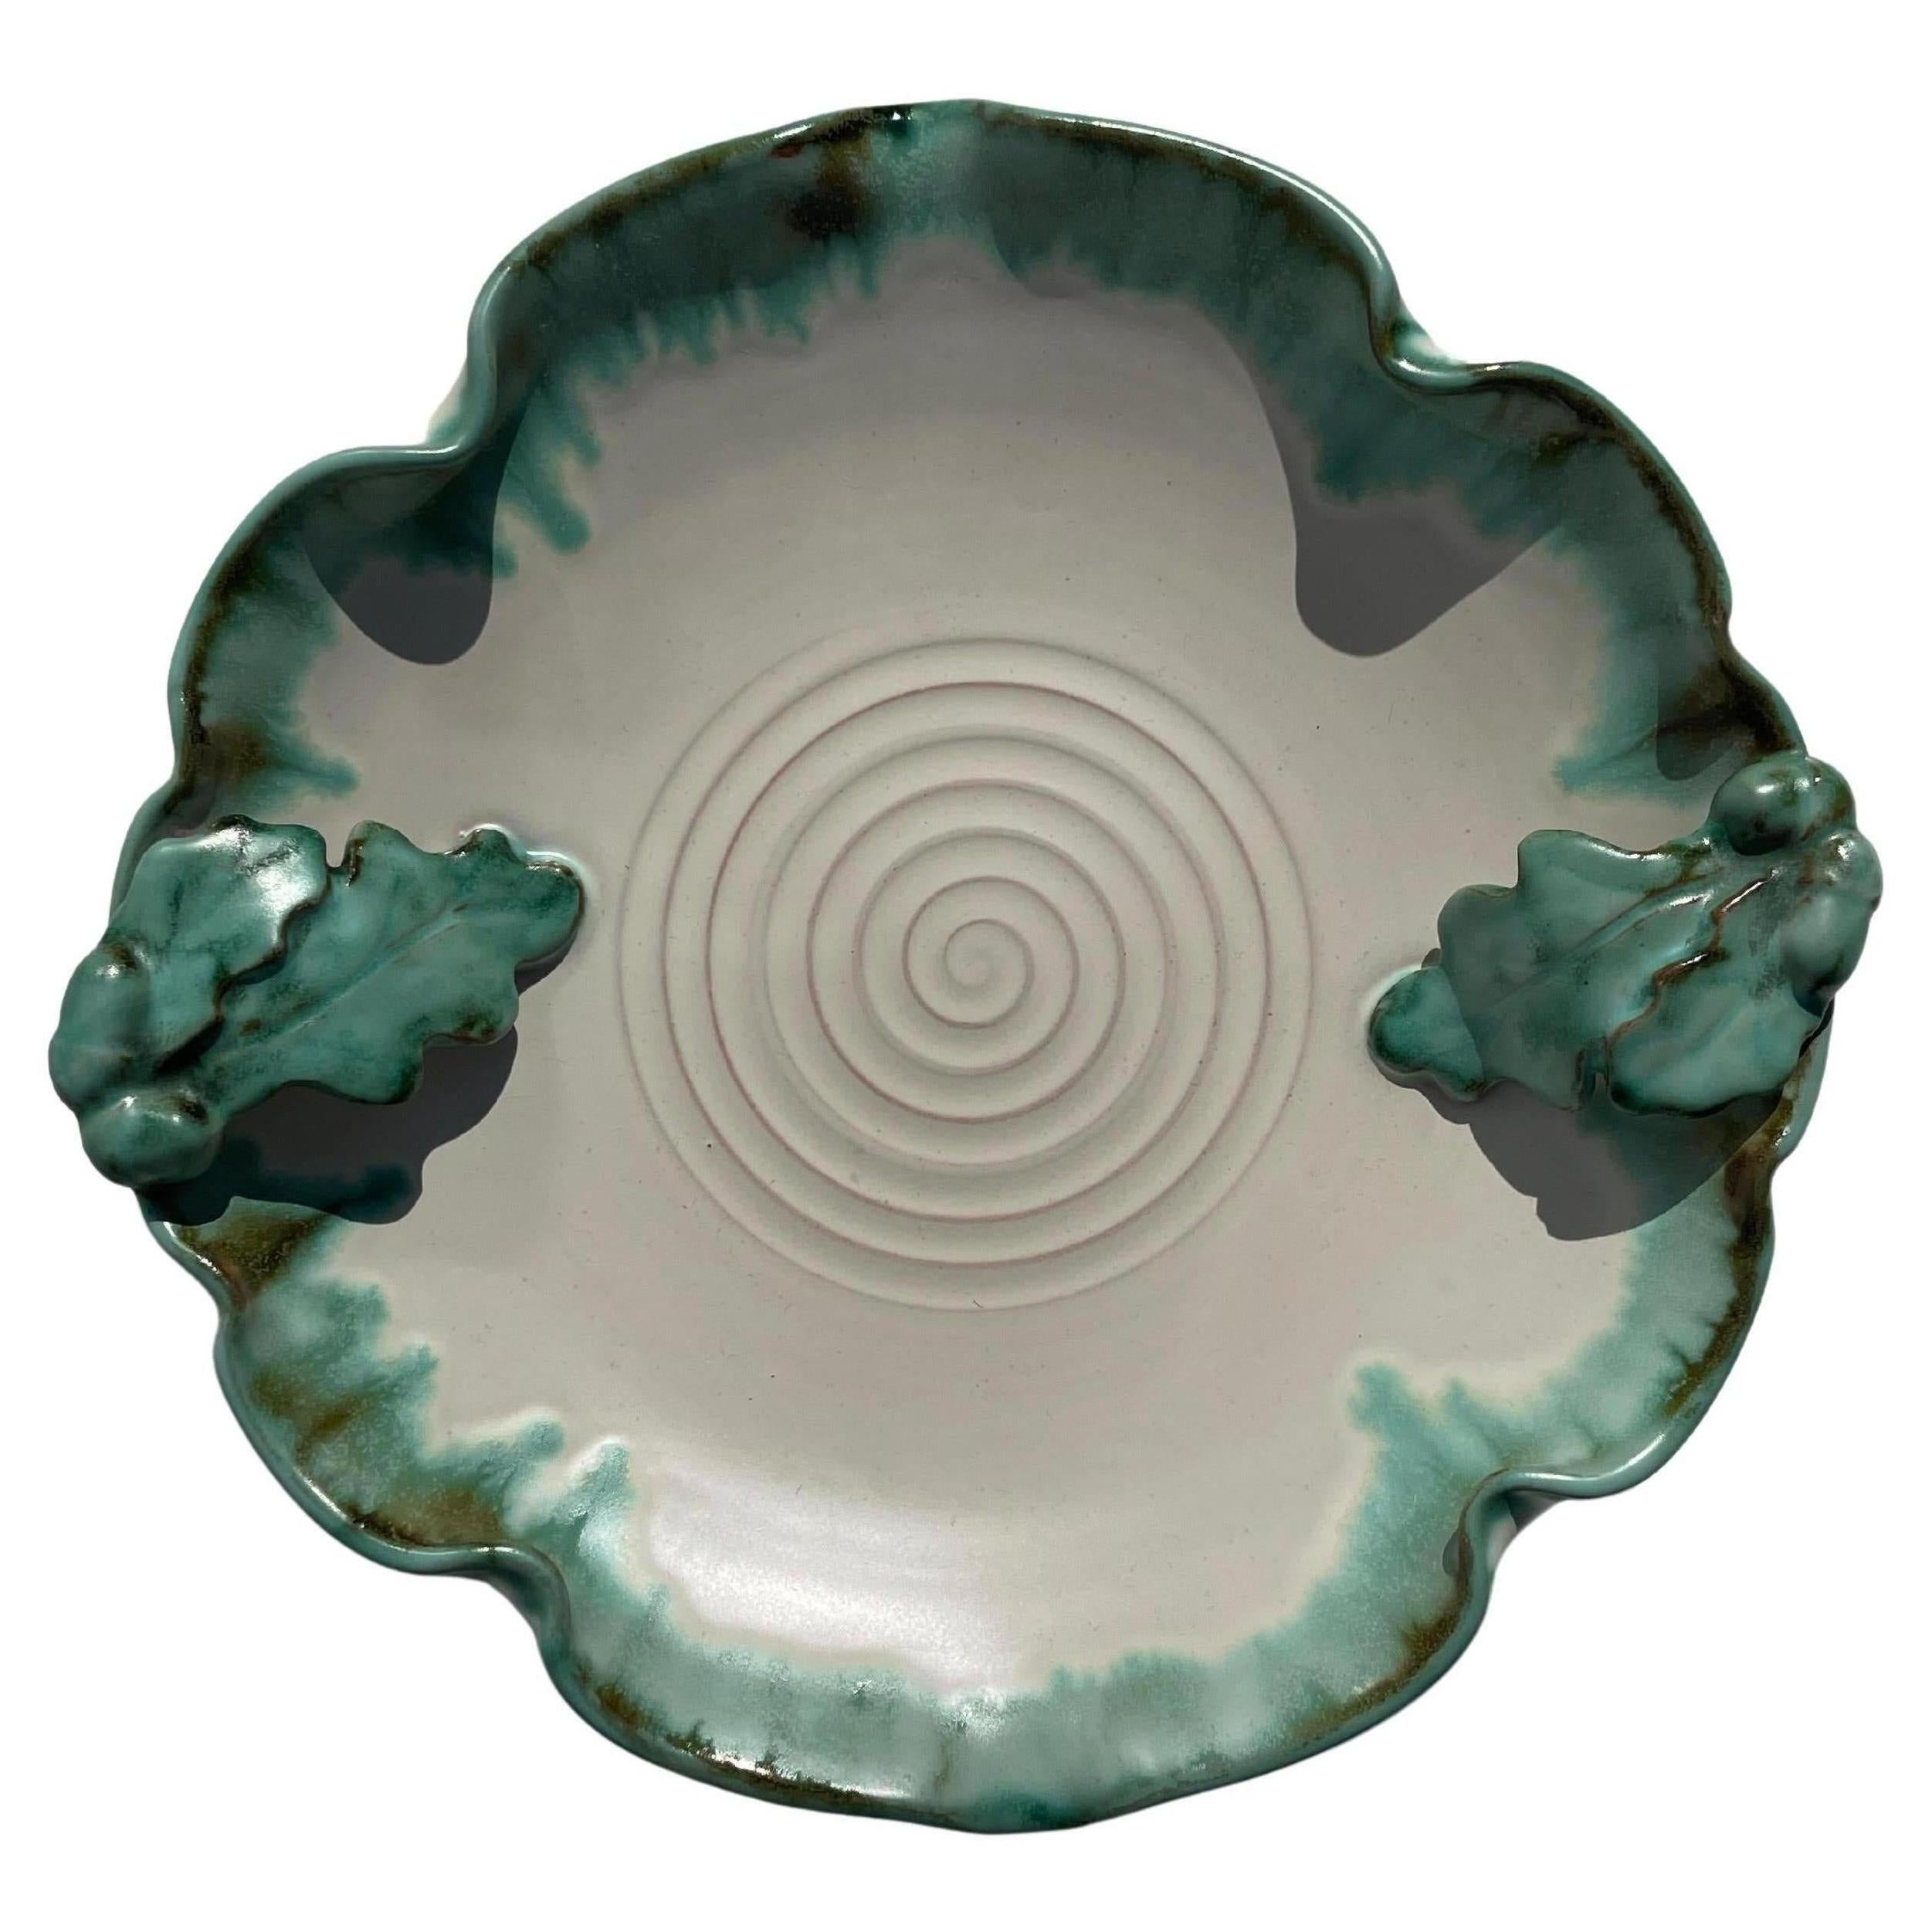 Handmade ceramic art nouveau white and green decorative centerpiece bowl with soft shaped edges in the style of Arne Bang. Organic green leaf decorations with great details on two sides. Numbered under base. Beautiful vintage condition.